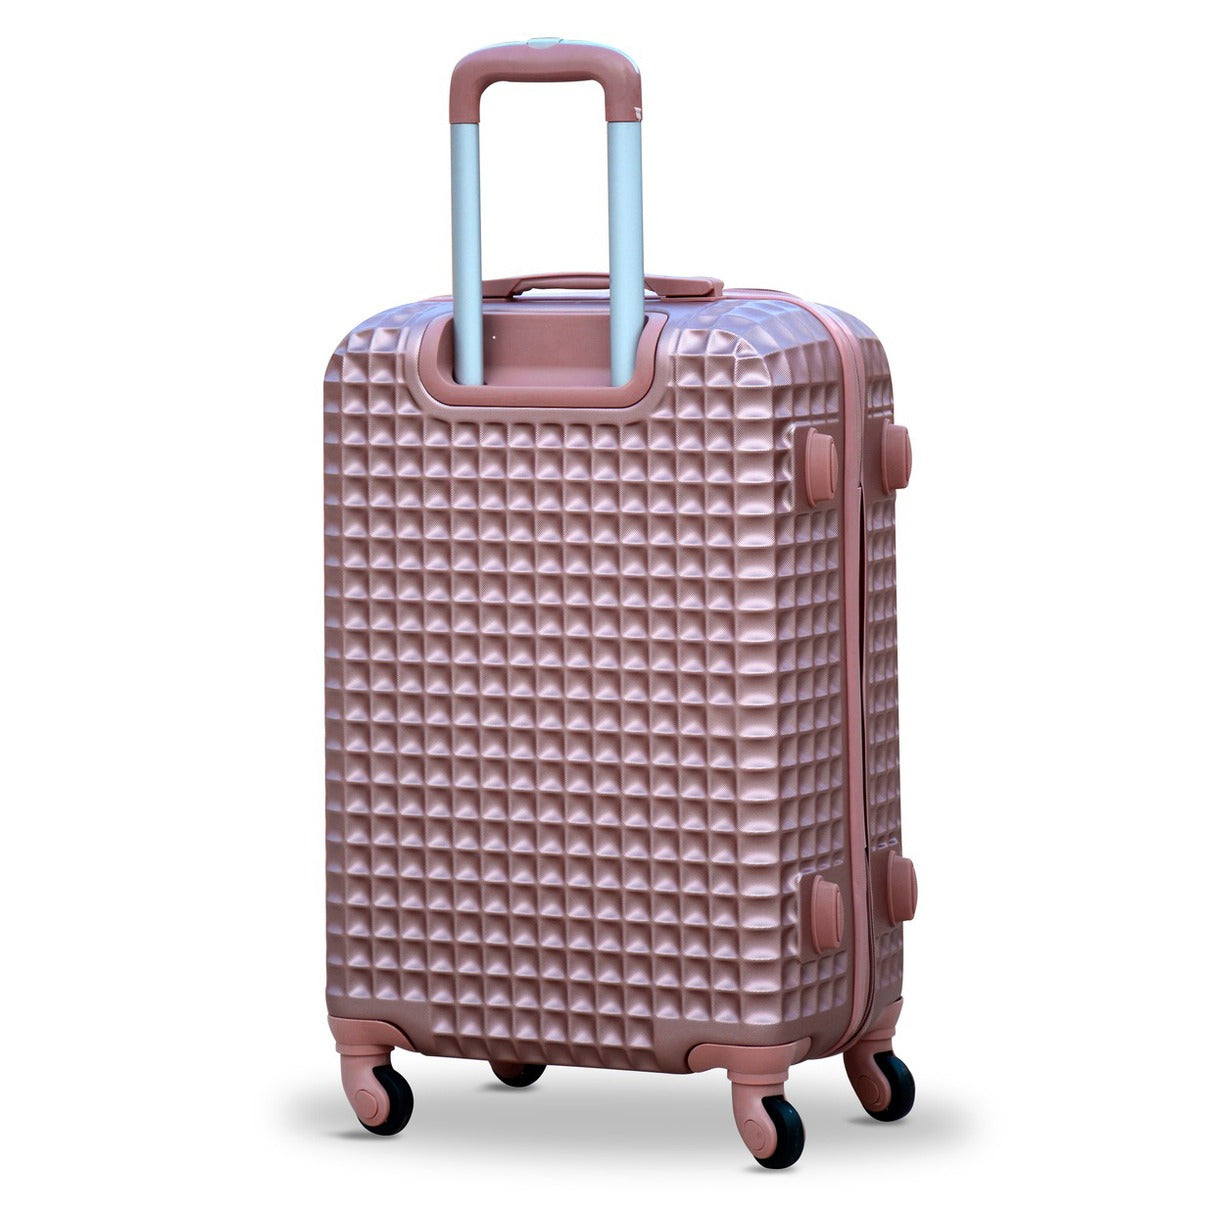 5 Piece Set 7" 20" 24" 28" 32 Inches Rose Gold Colour Square Cut ABS Lightweight Luggage Hard Case Trolley Bag | 2 Year Warranty